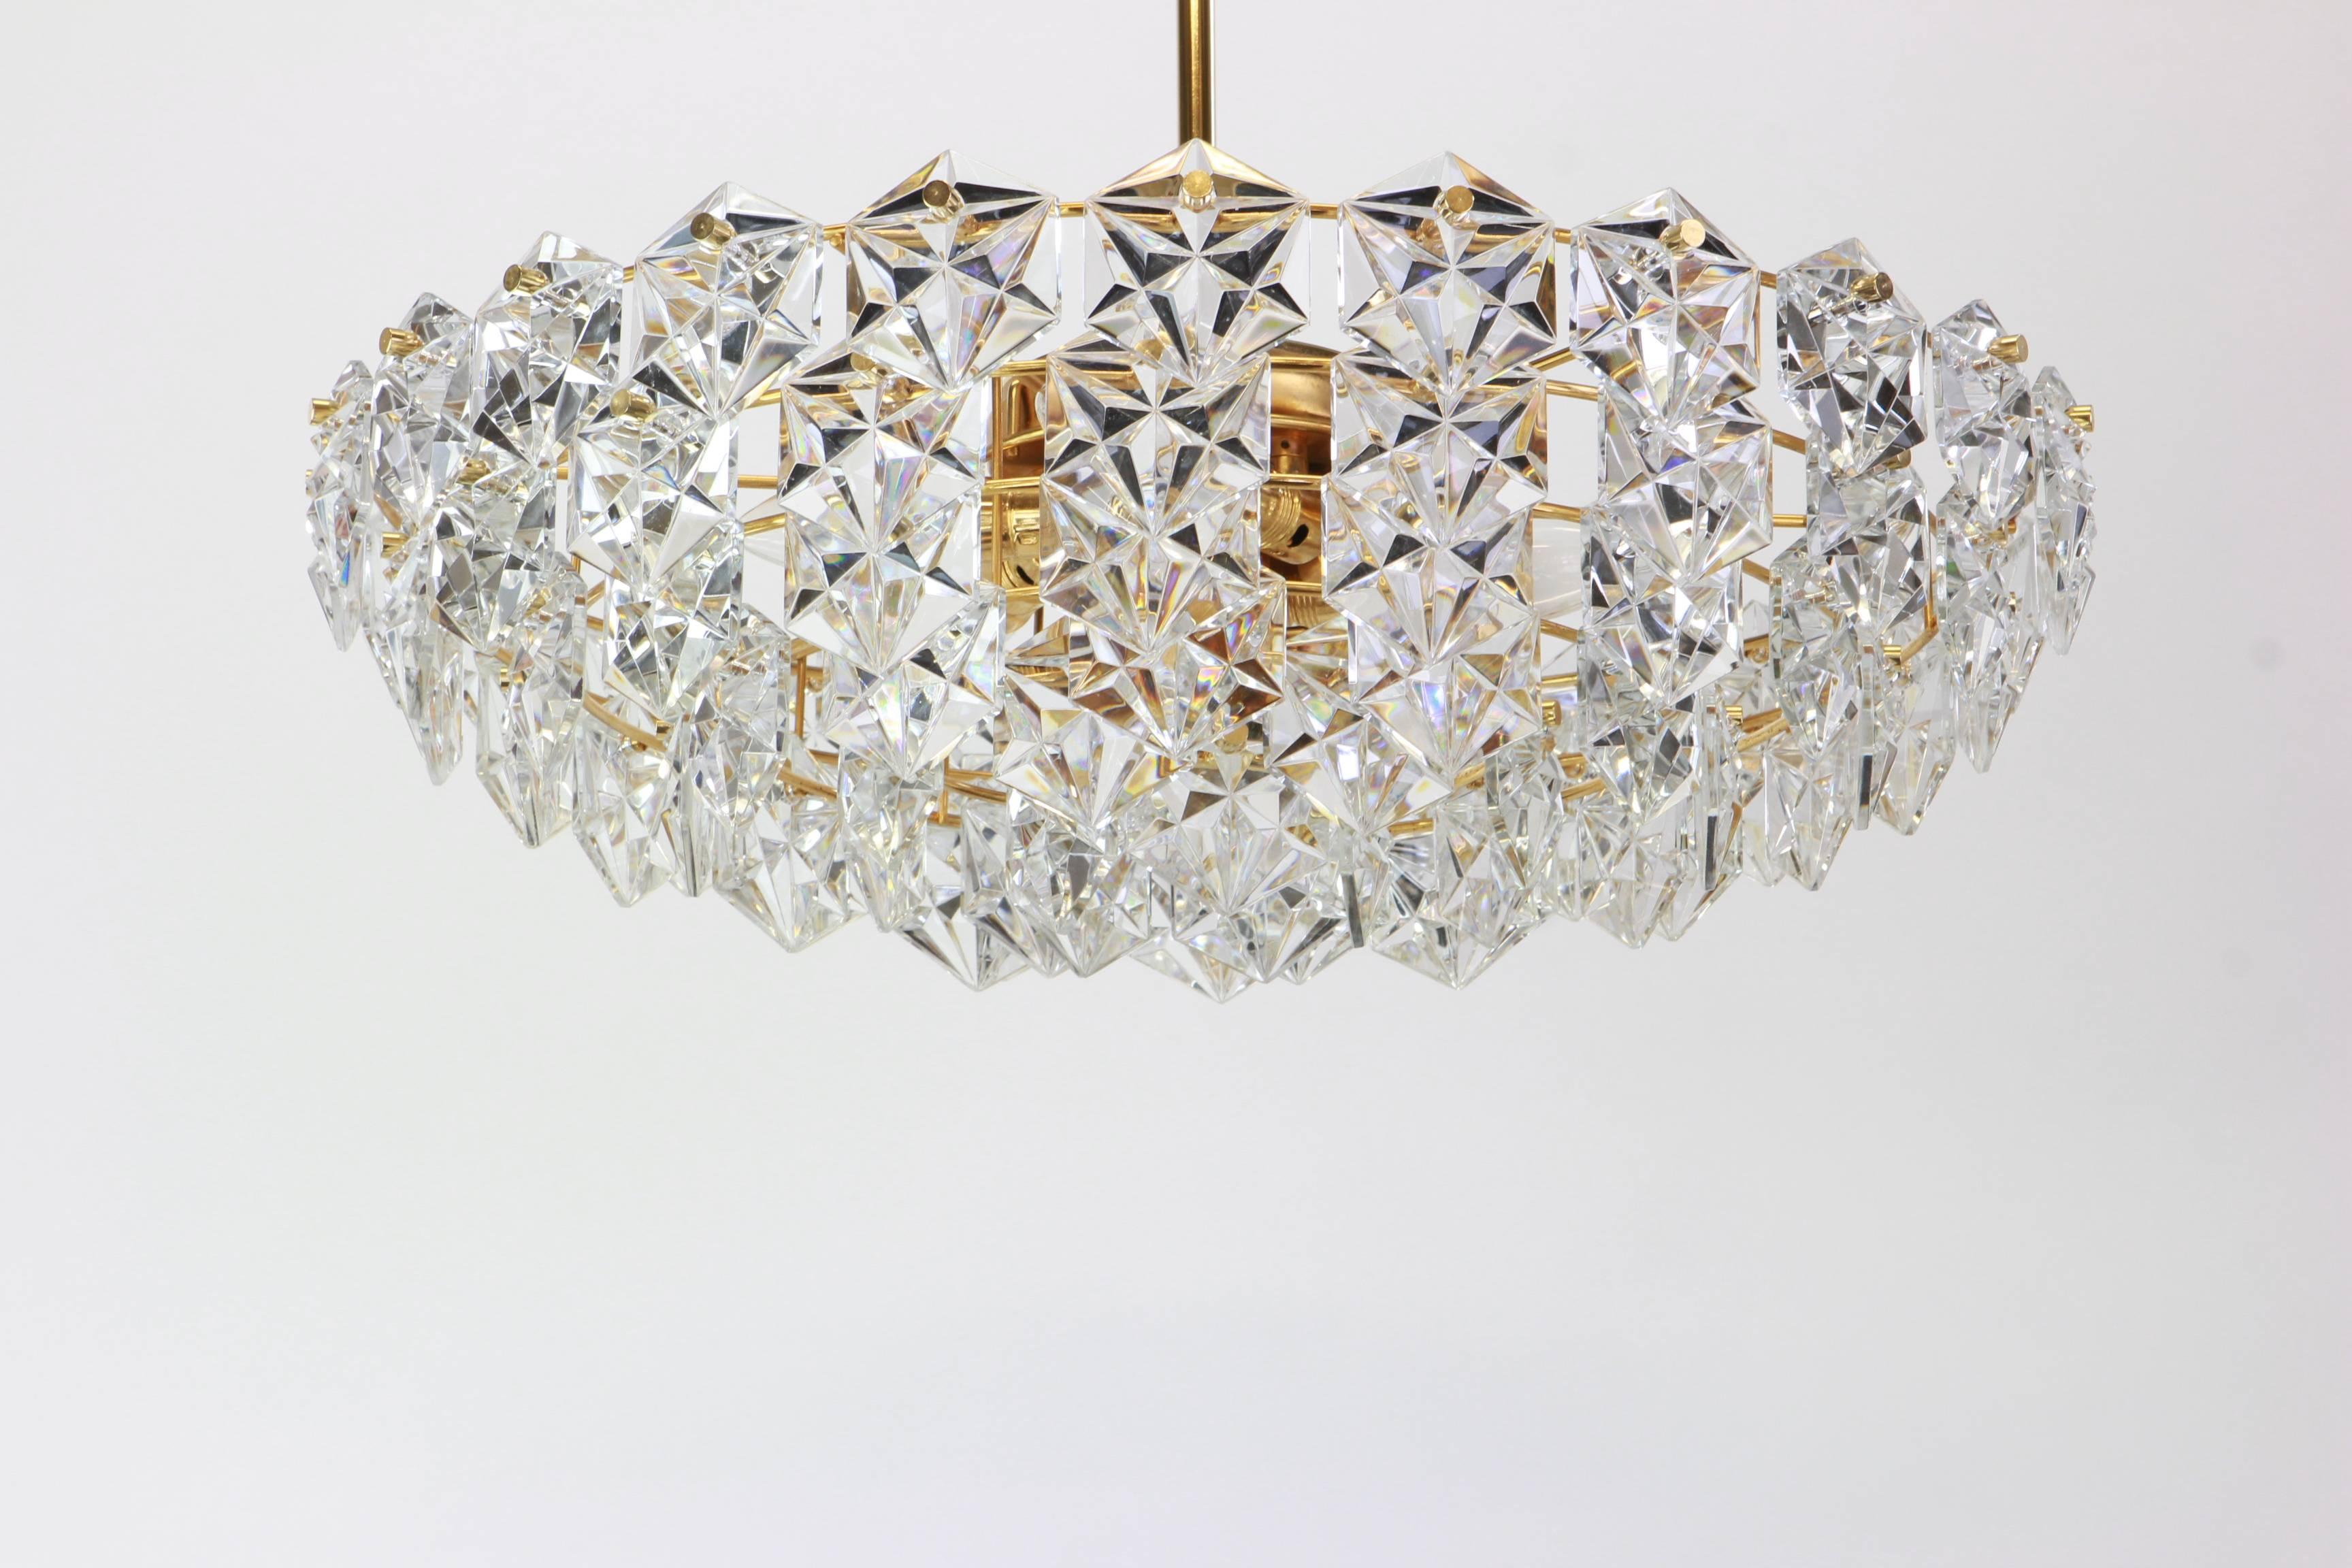 A stunning chandelier by Kinkeldey, Germany, manufactured in circa 1970-1979. A handmade and high quality piece. The ceiling fixture and the frame are made of brass and has rings with lots of facetted crystal glass elements.

High quality and in